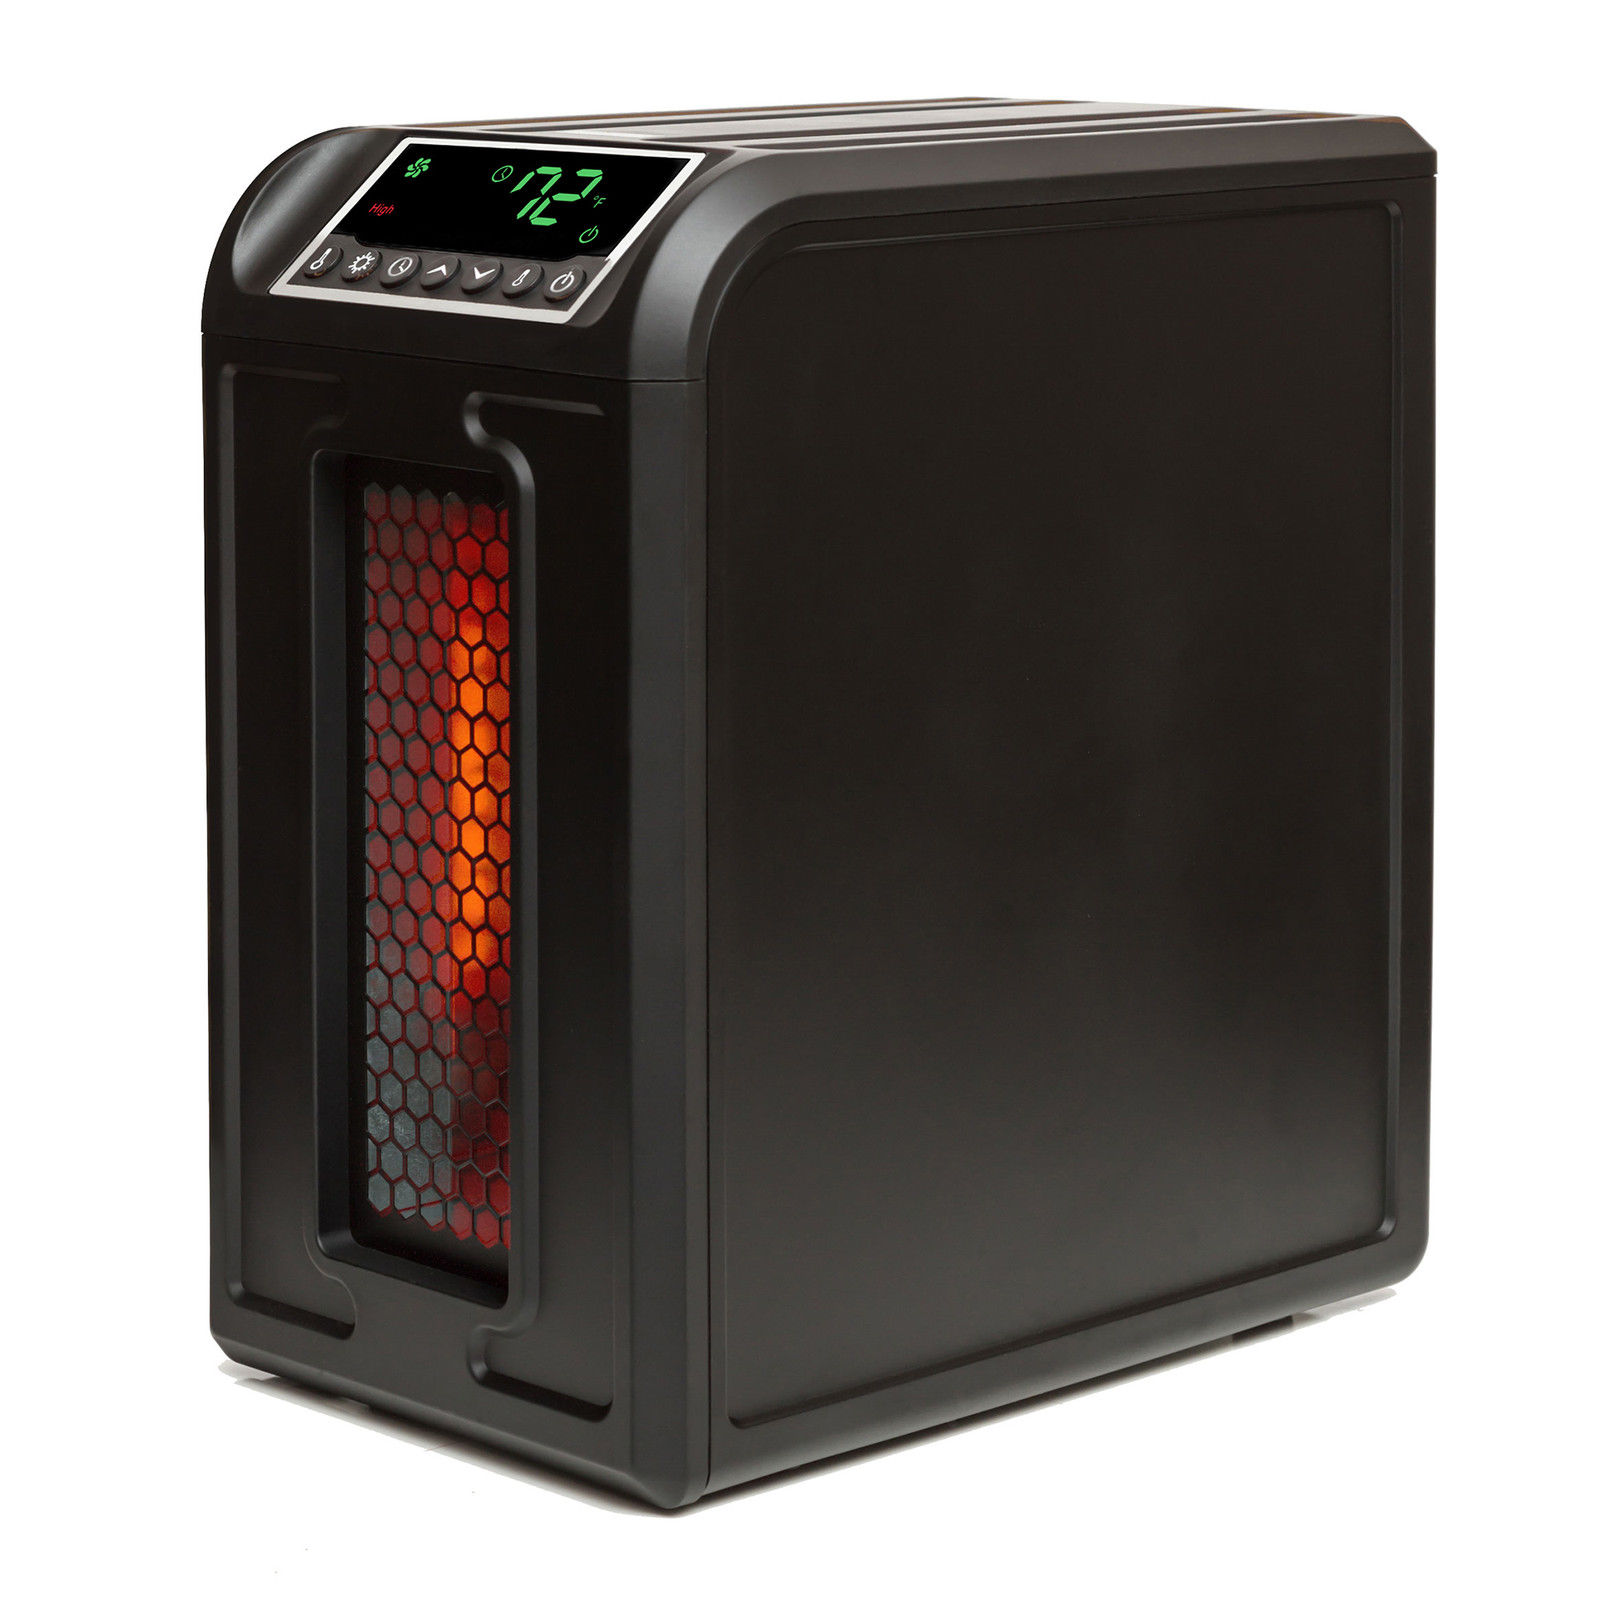 The Safe Way A Cordless Portable Heaters